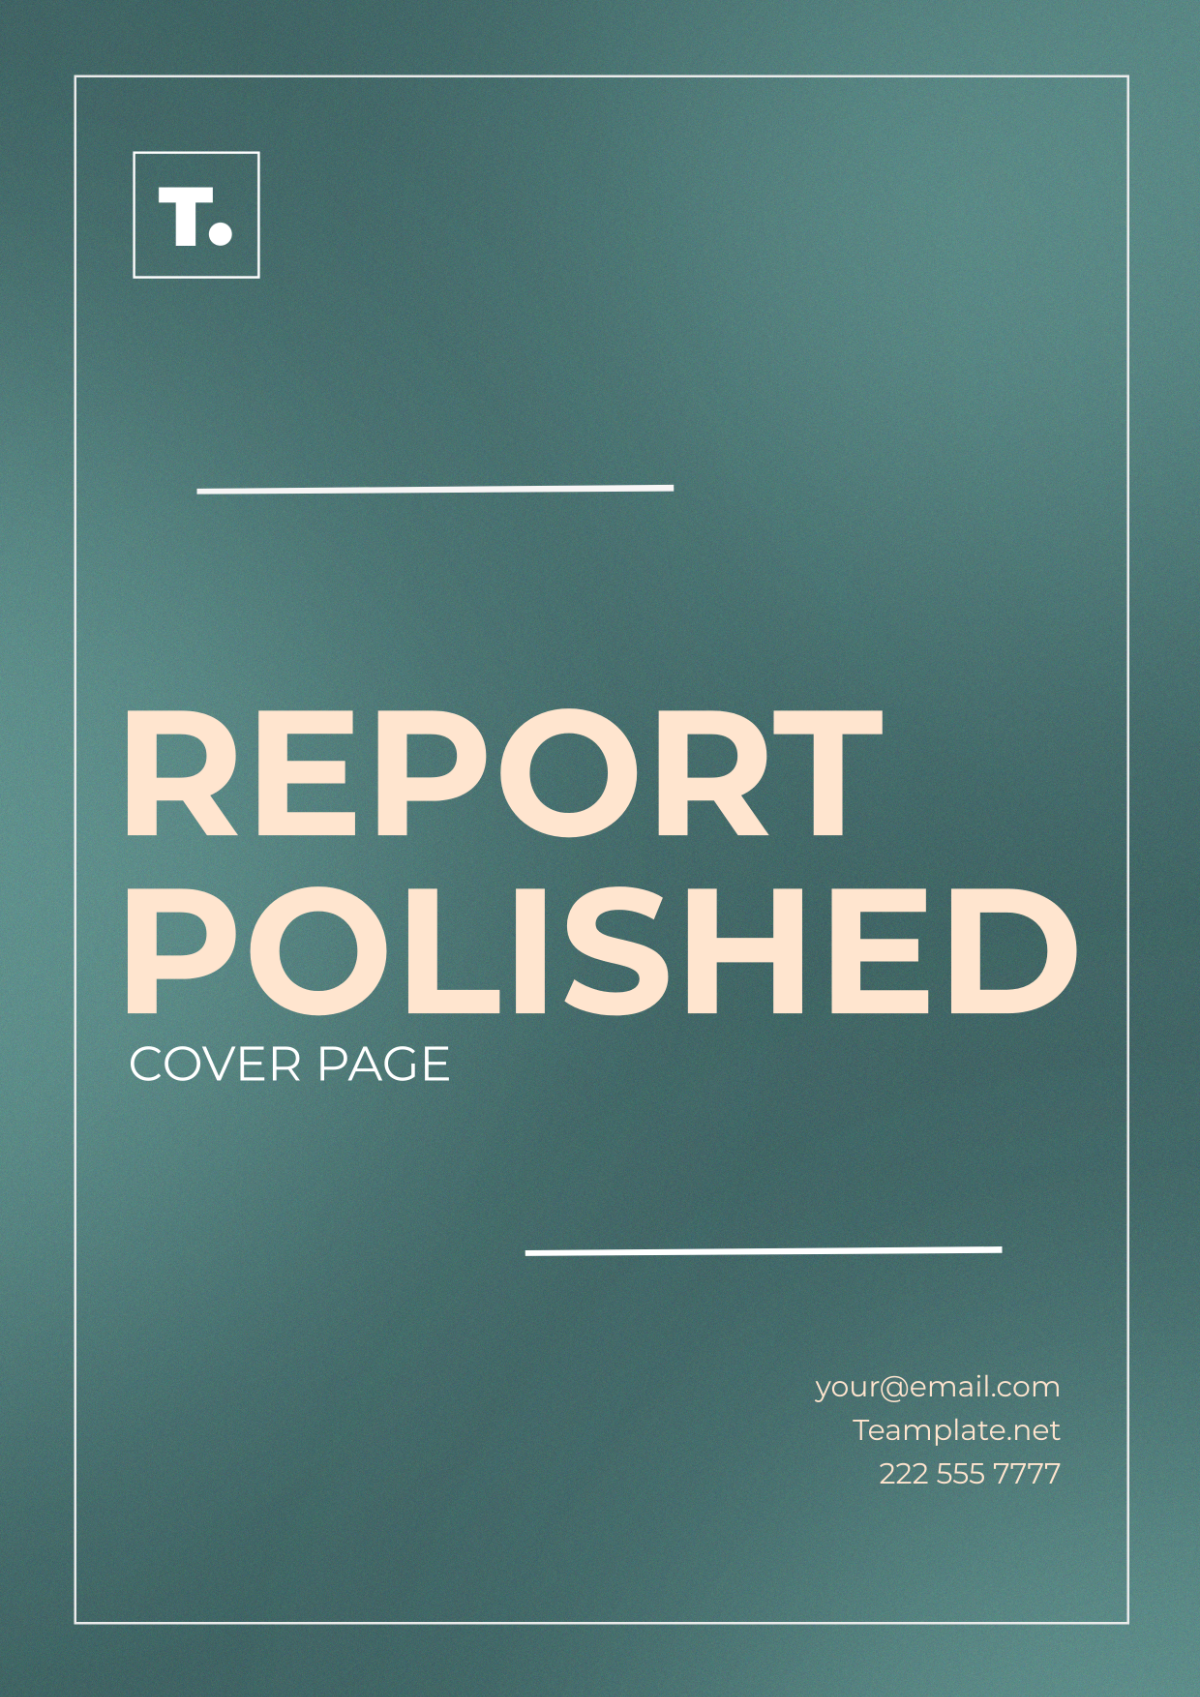 Report Polished Cover Page Template